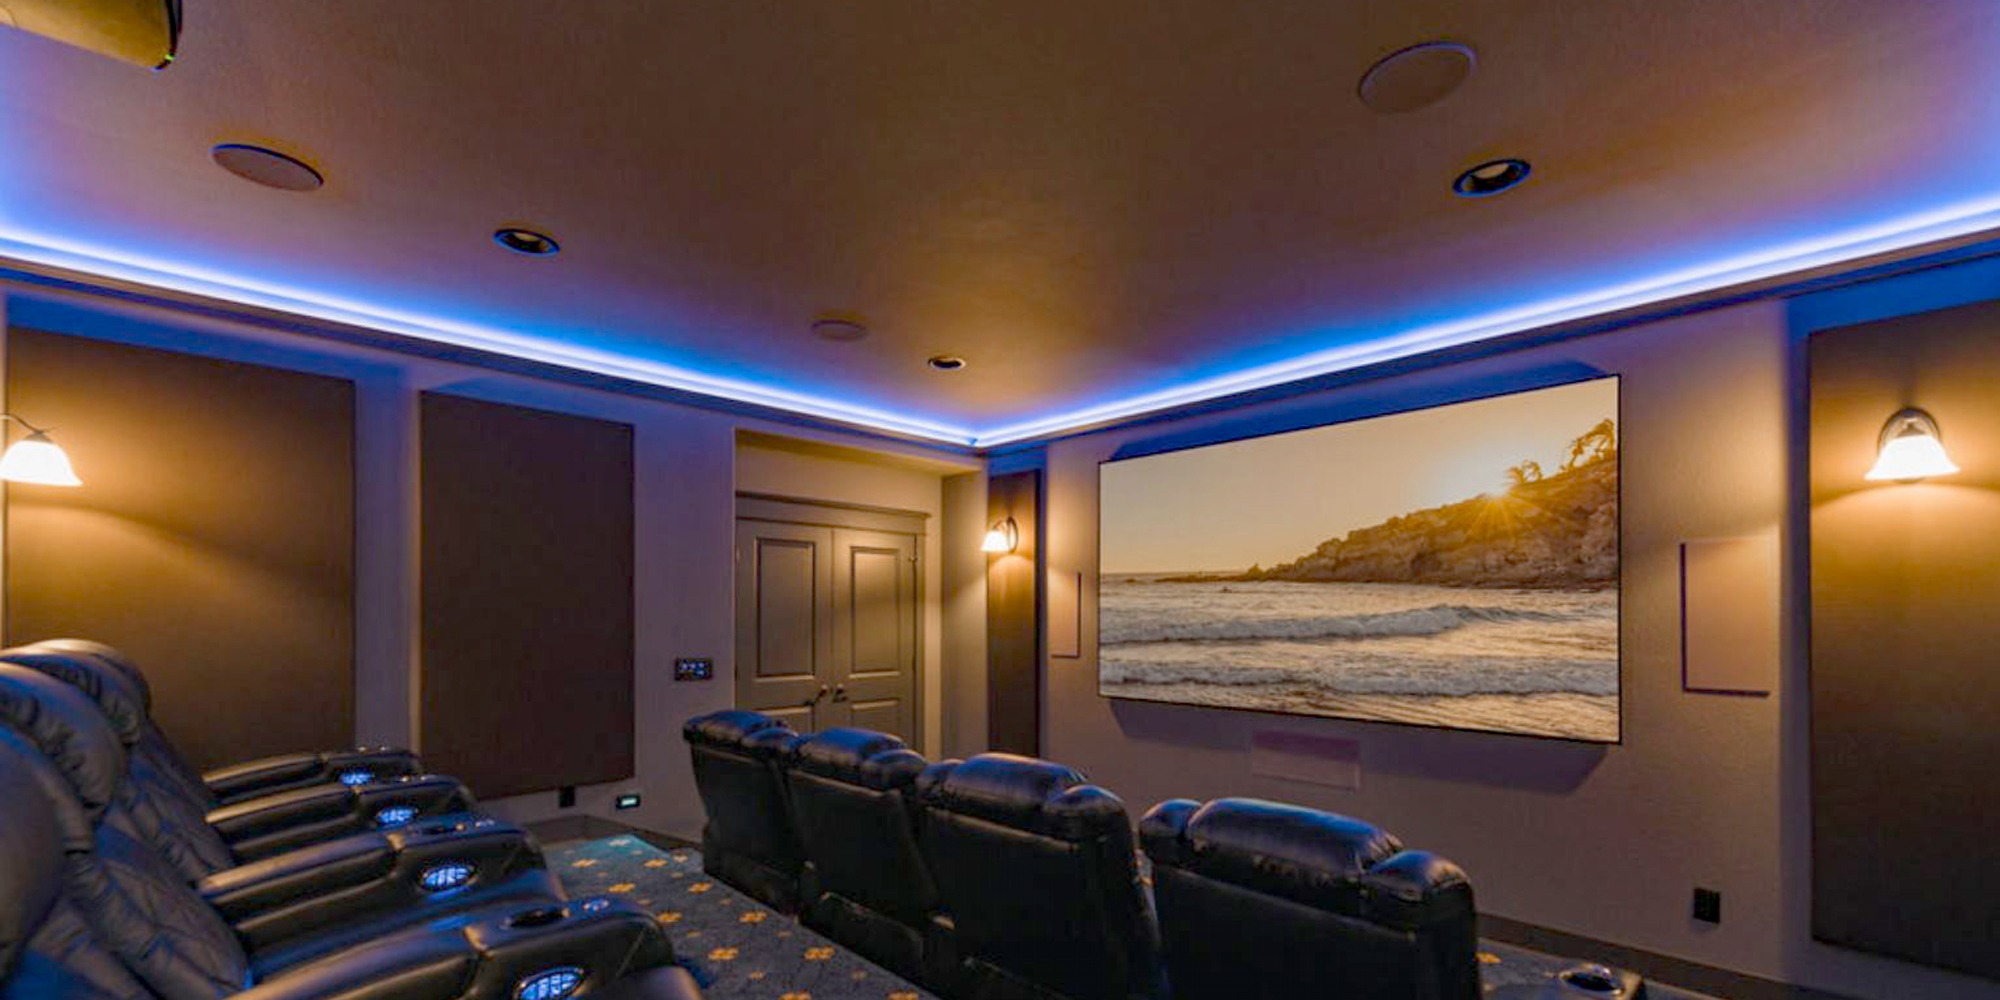 Large screen media room with projector, designed and installed by Home Systems